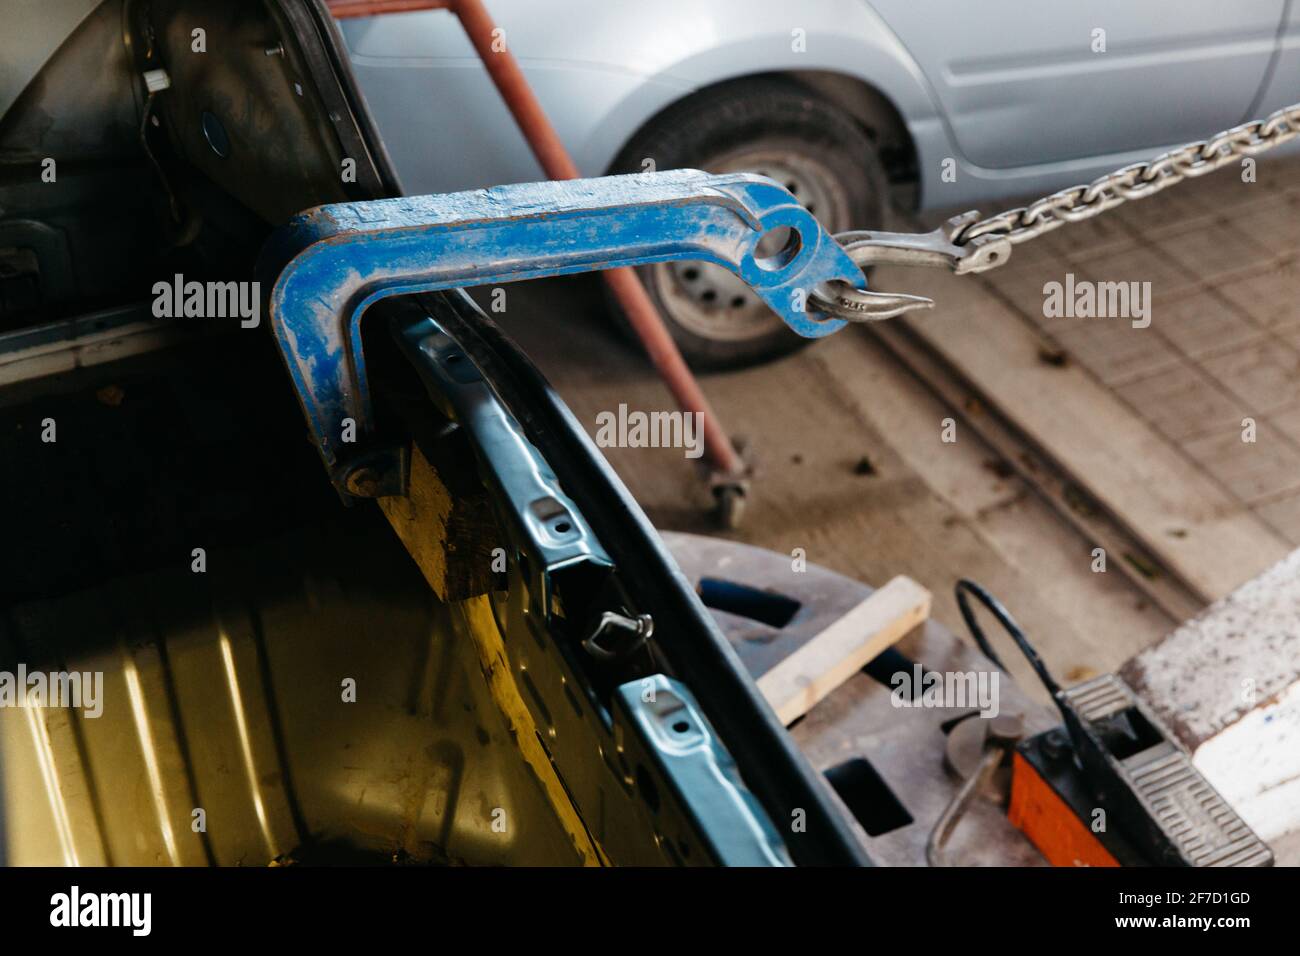 Car has dented rear bumper damaged after accident. Pulling auto body. Stock Photo